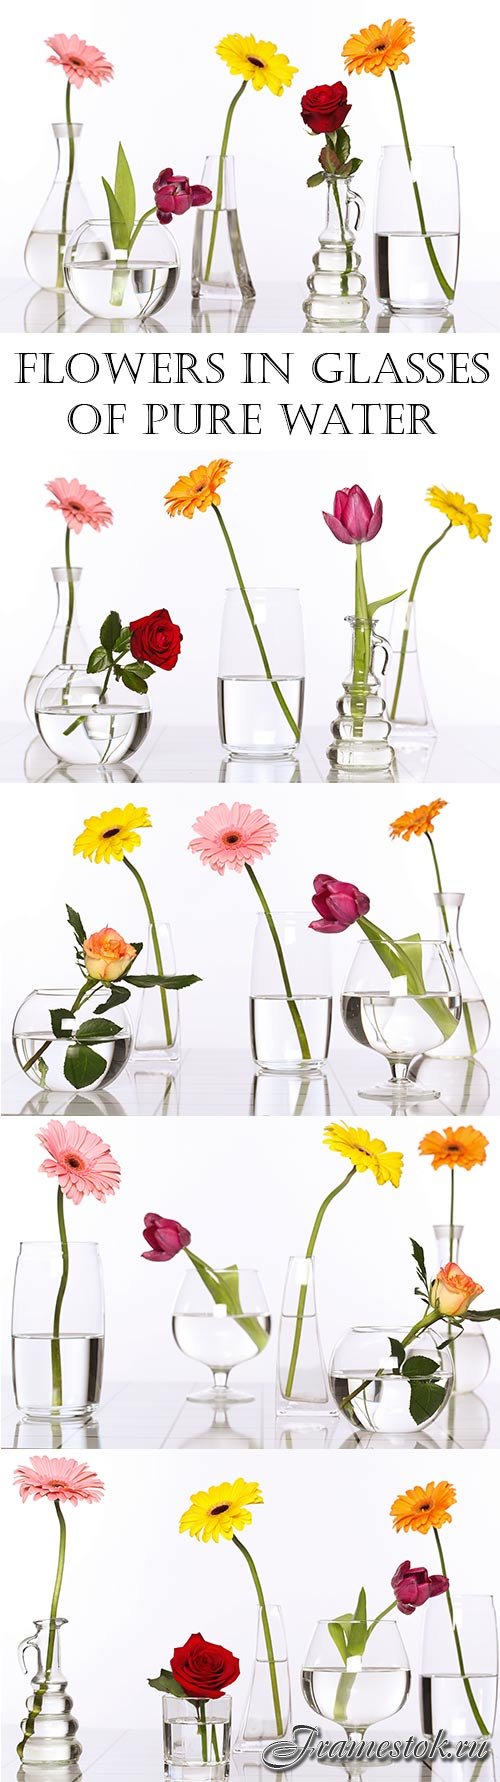 Flowers in glasses of pure water